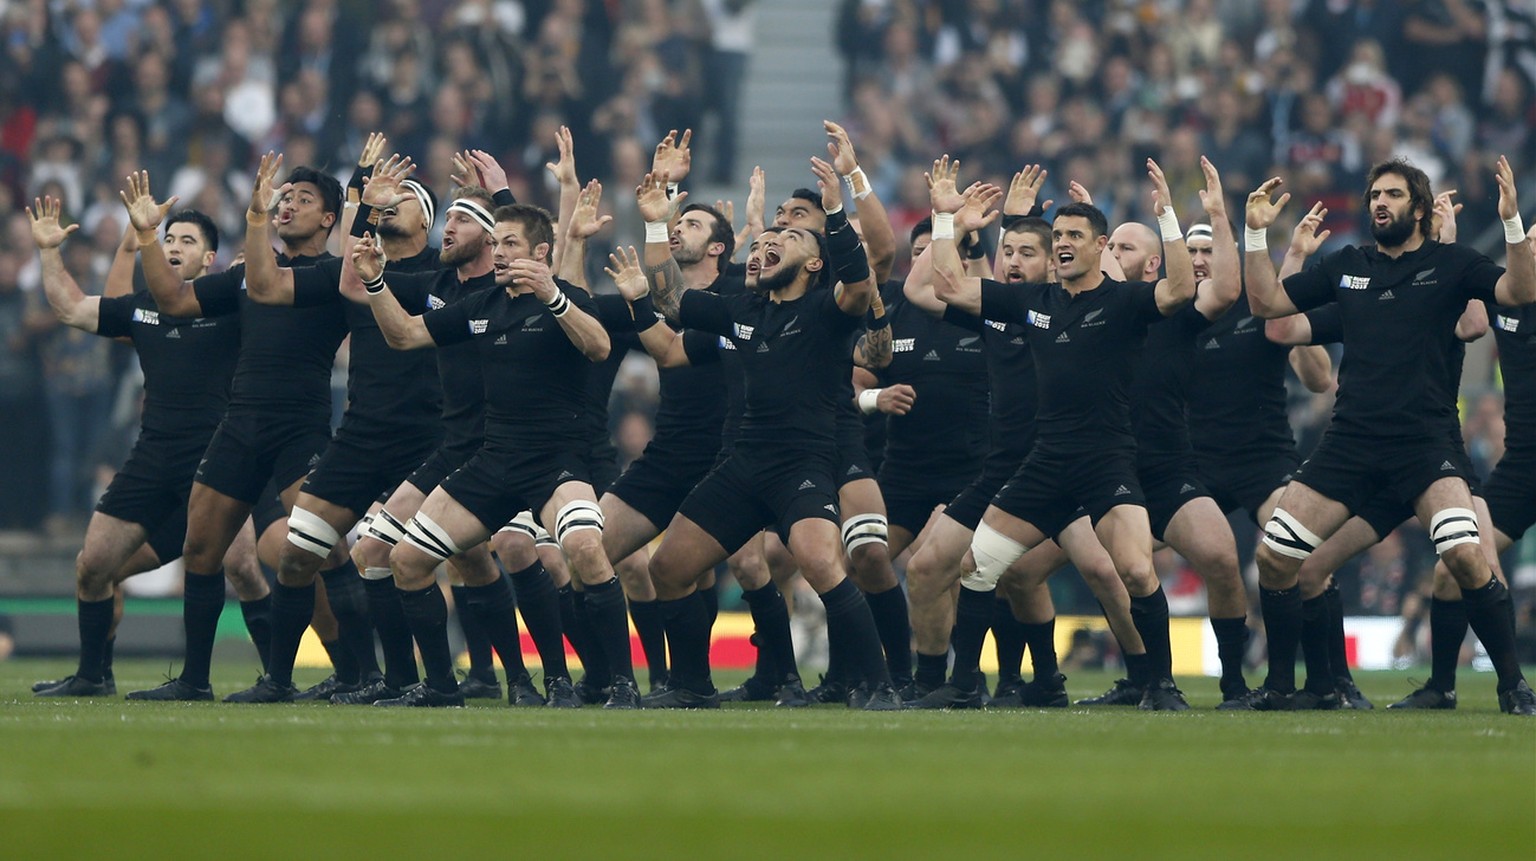 New Zealand players perform the haka before the Rugby World Cup final between New Zealand and Australia at Twickenham Stadium, London, Saturday, Oct. 31, 2015. (AP Photo/Frank Augstein)